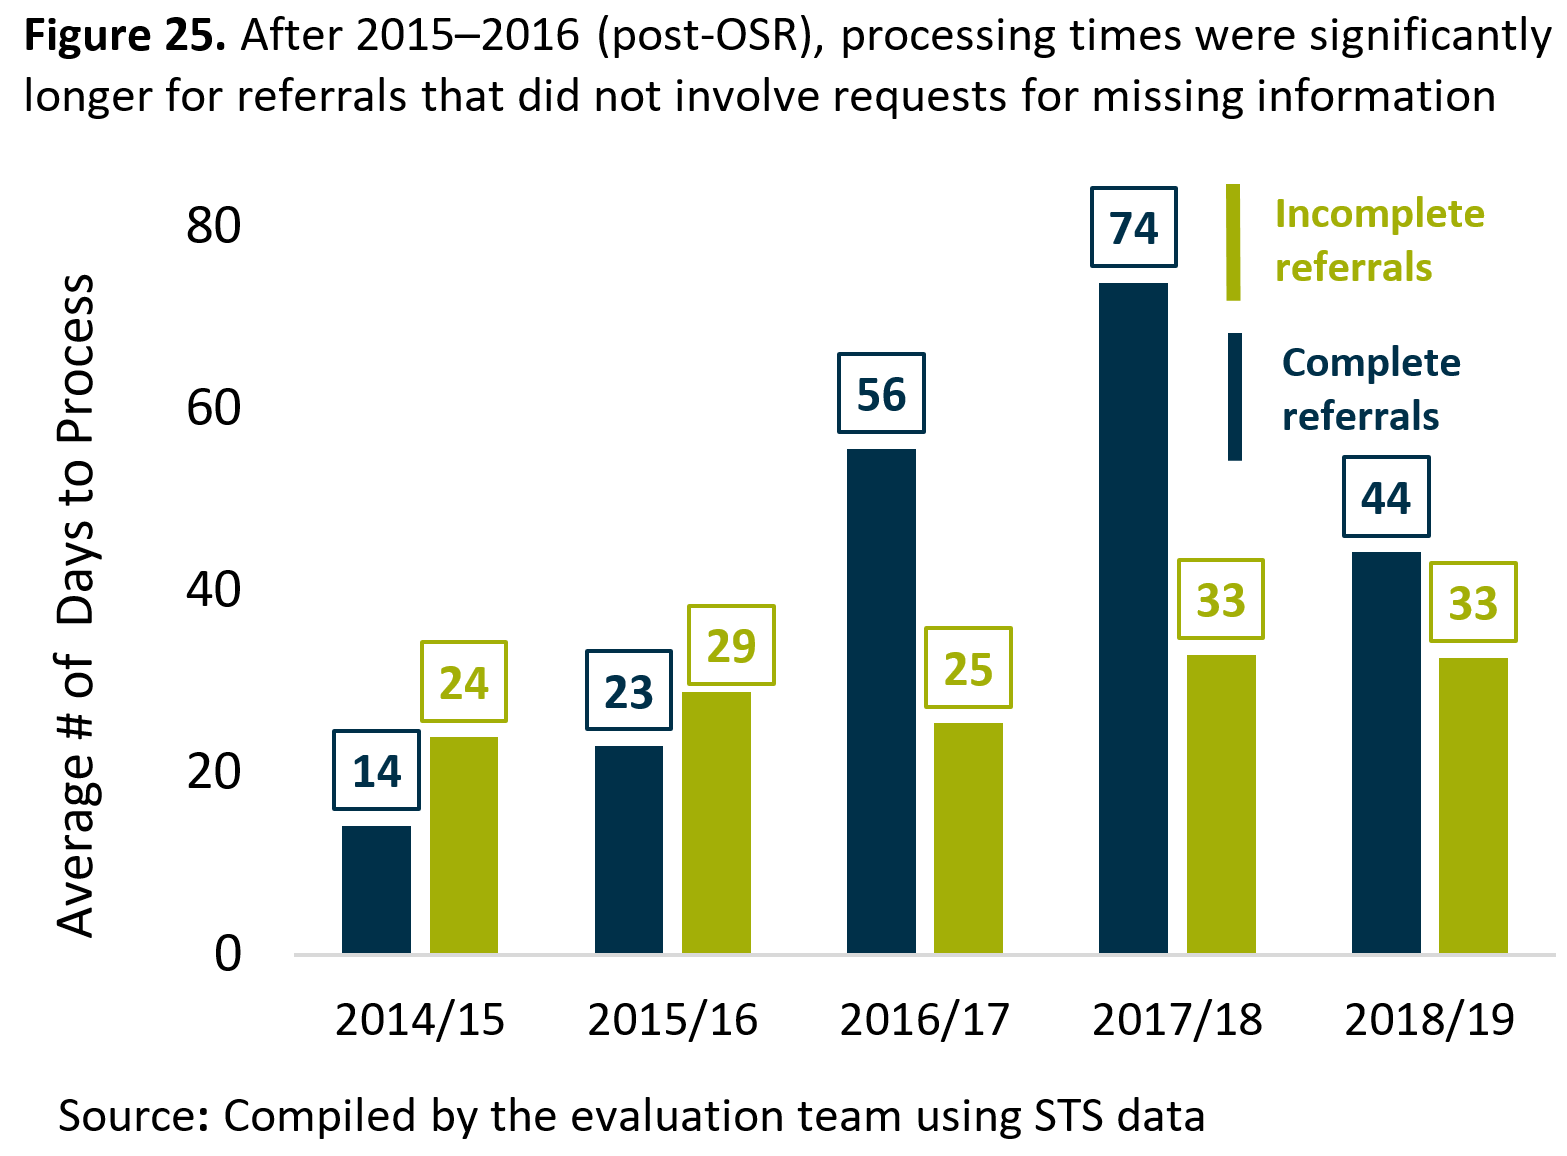 Figure 25. After 2015 to 2016 (post-<abbr>OSR</abbr>), processing times were significantly longer for referrals that did not involve requests for missing information